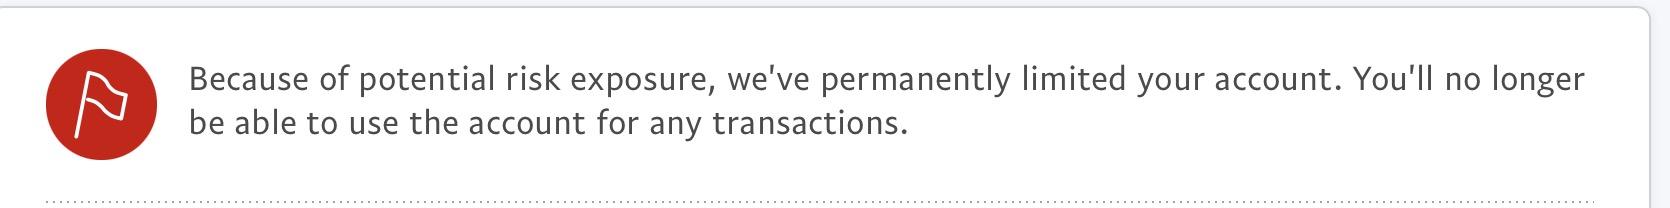 paypal permanently limited your account